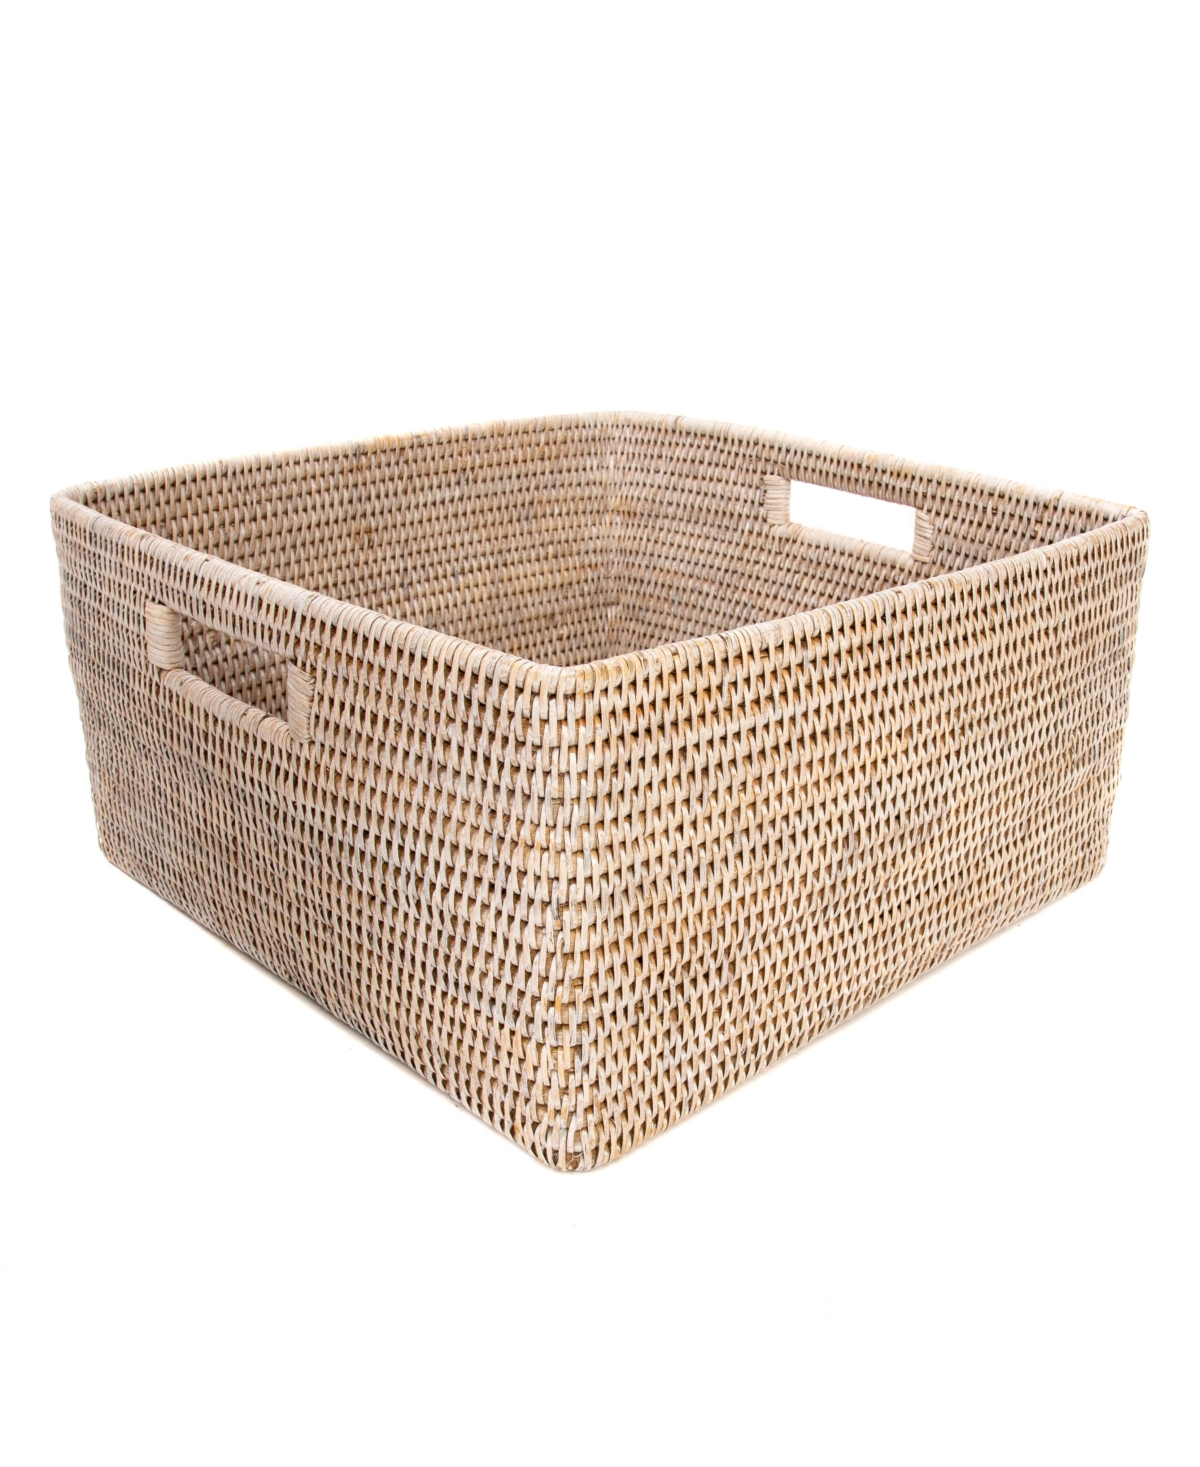 Artifacts Trading Company Artifacts Rattan Square Storage Basket In Off-white